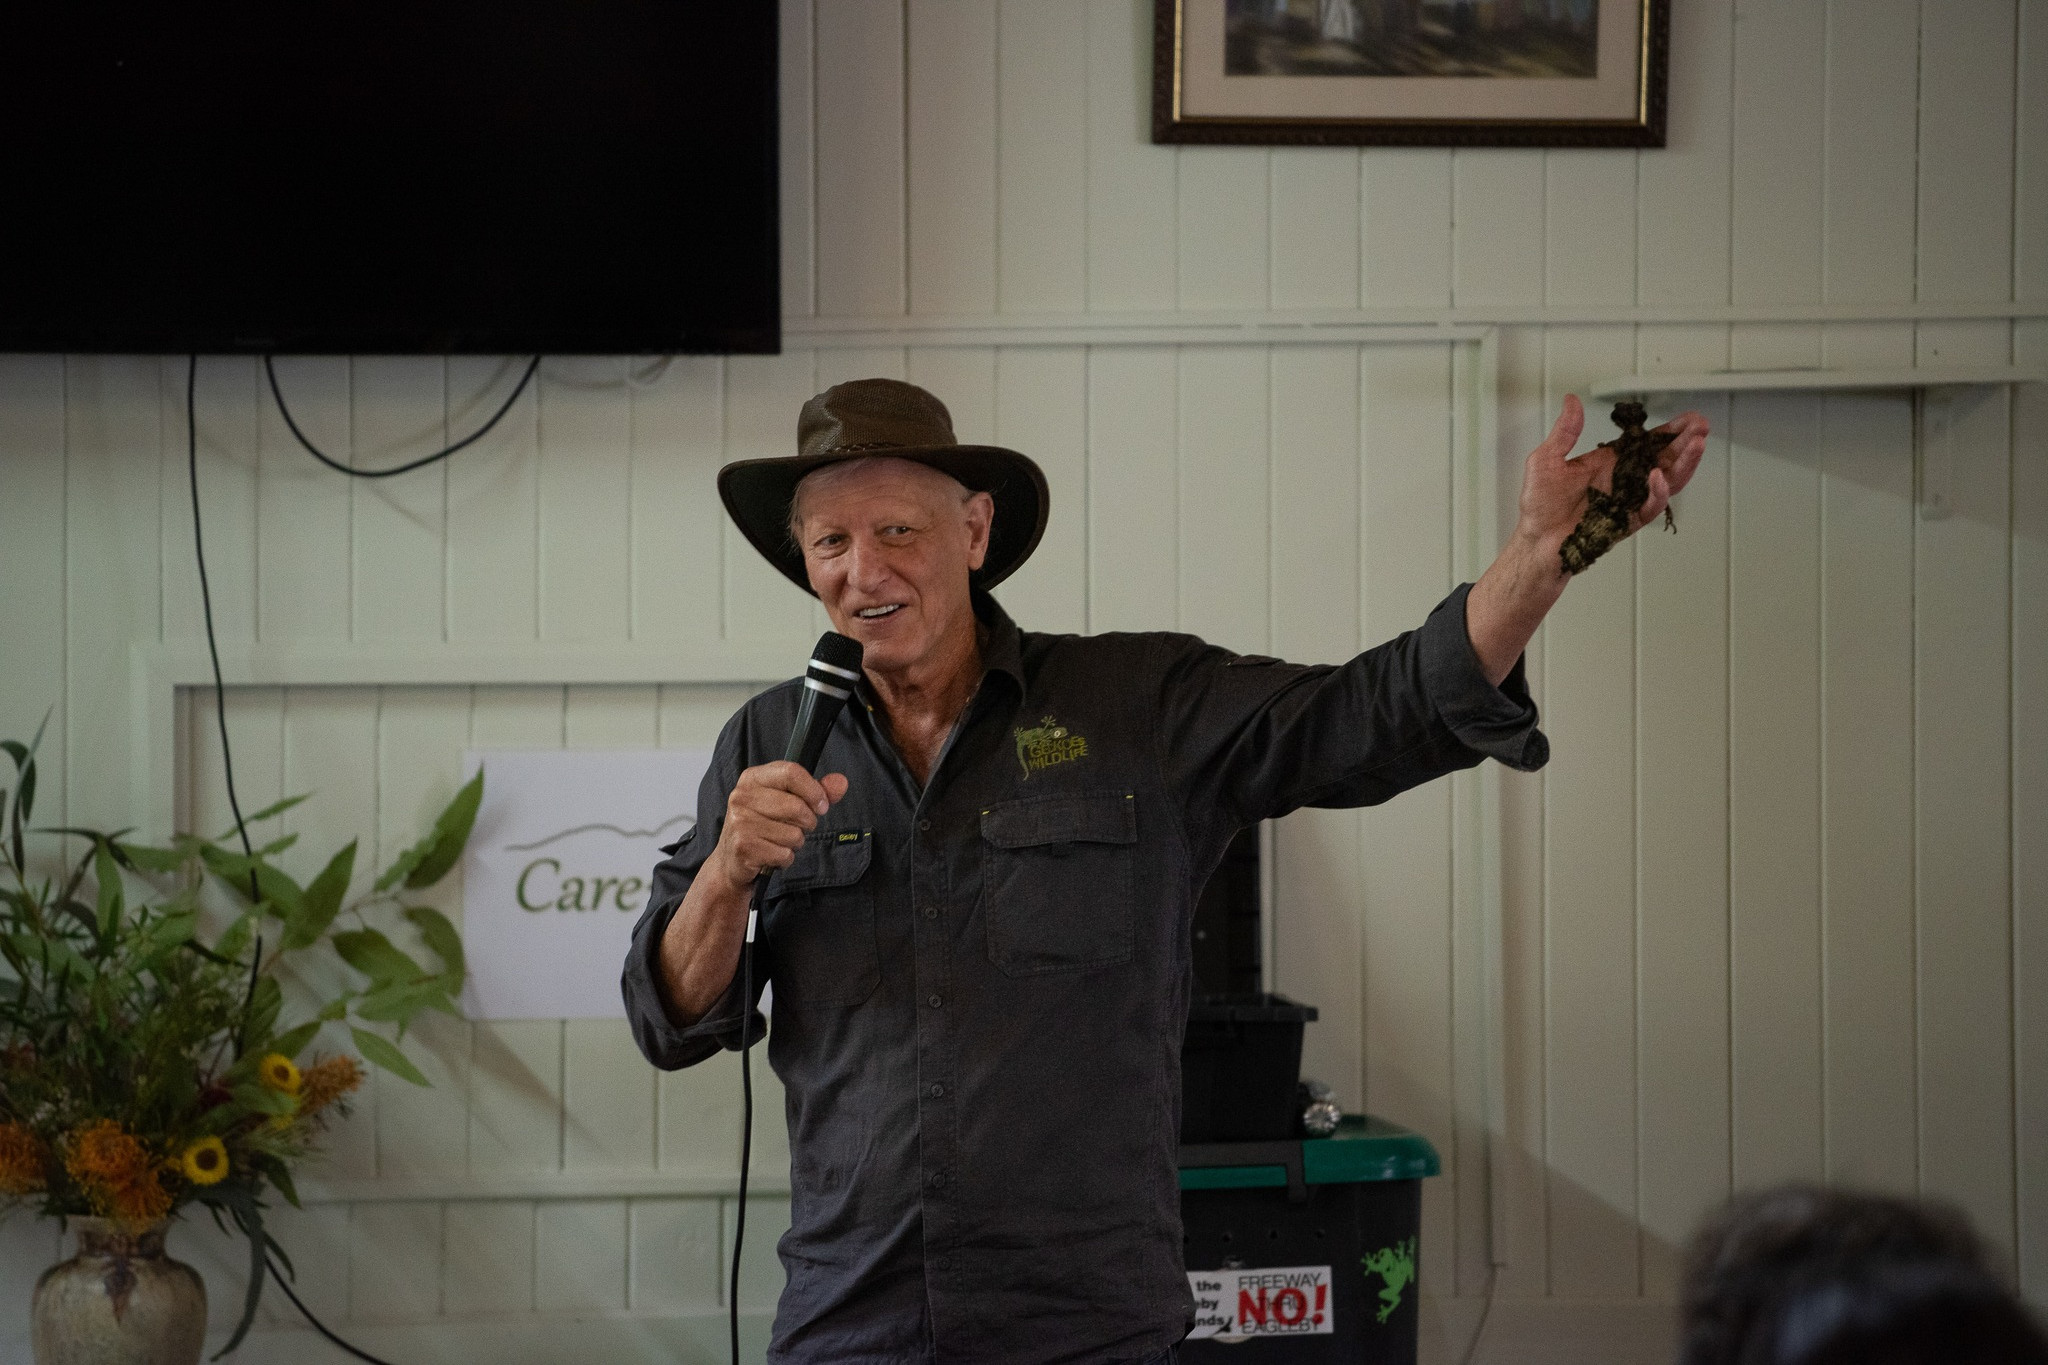 Martin Fingland from Geckoes Wildlife was a crowd favourite at the community wildlife information event, organised by Care4EsK. Photo credit: Nadia Latter/Only With You Photography.